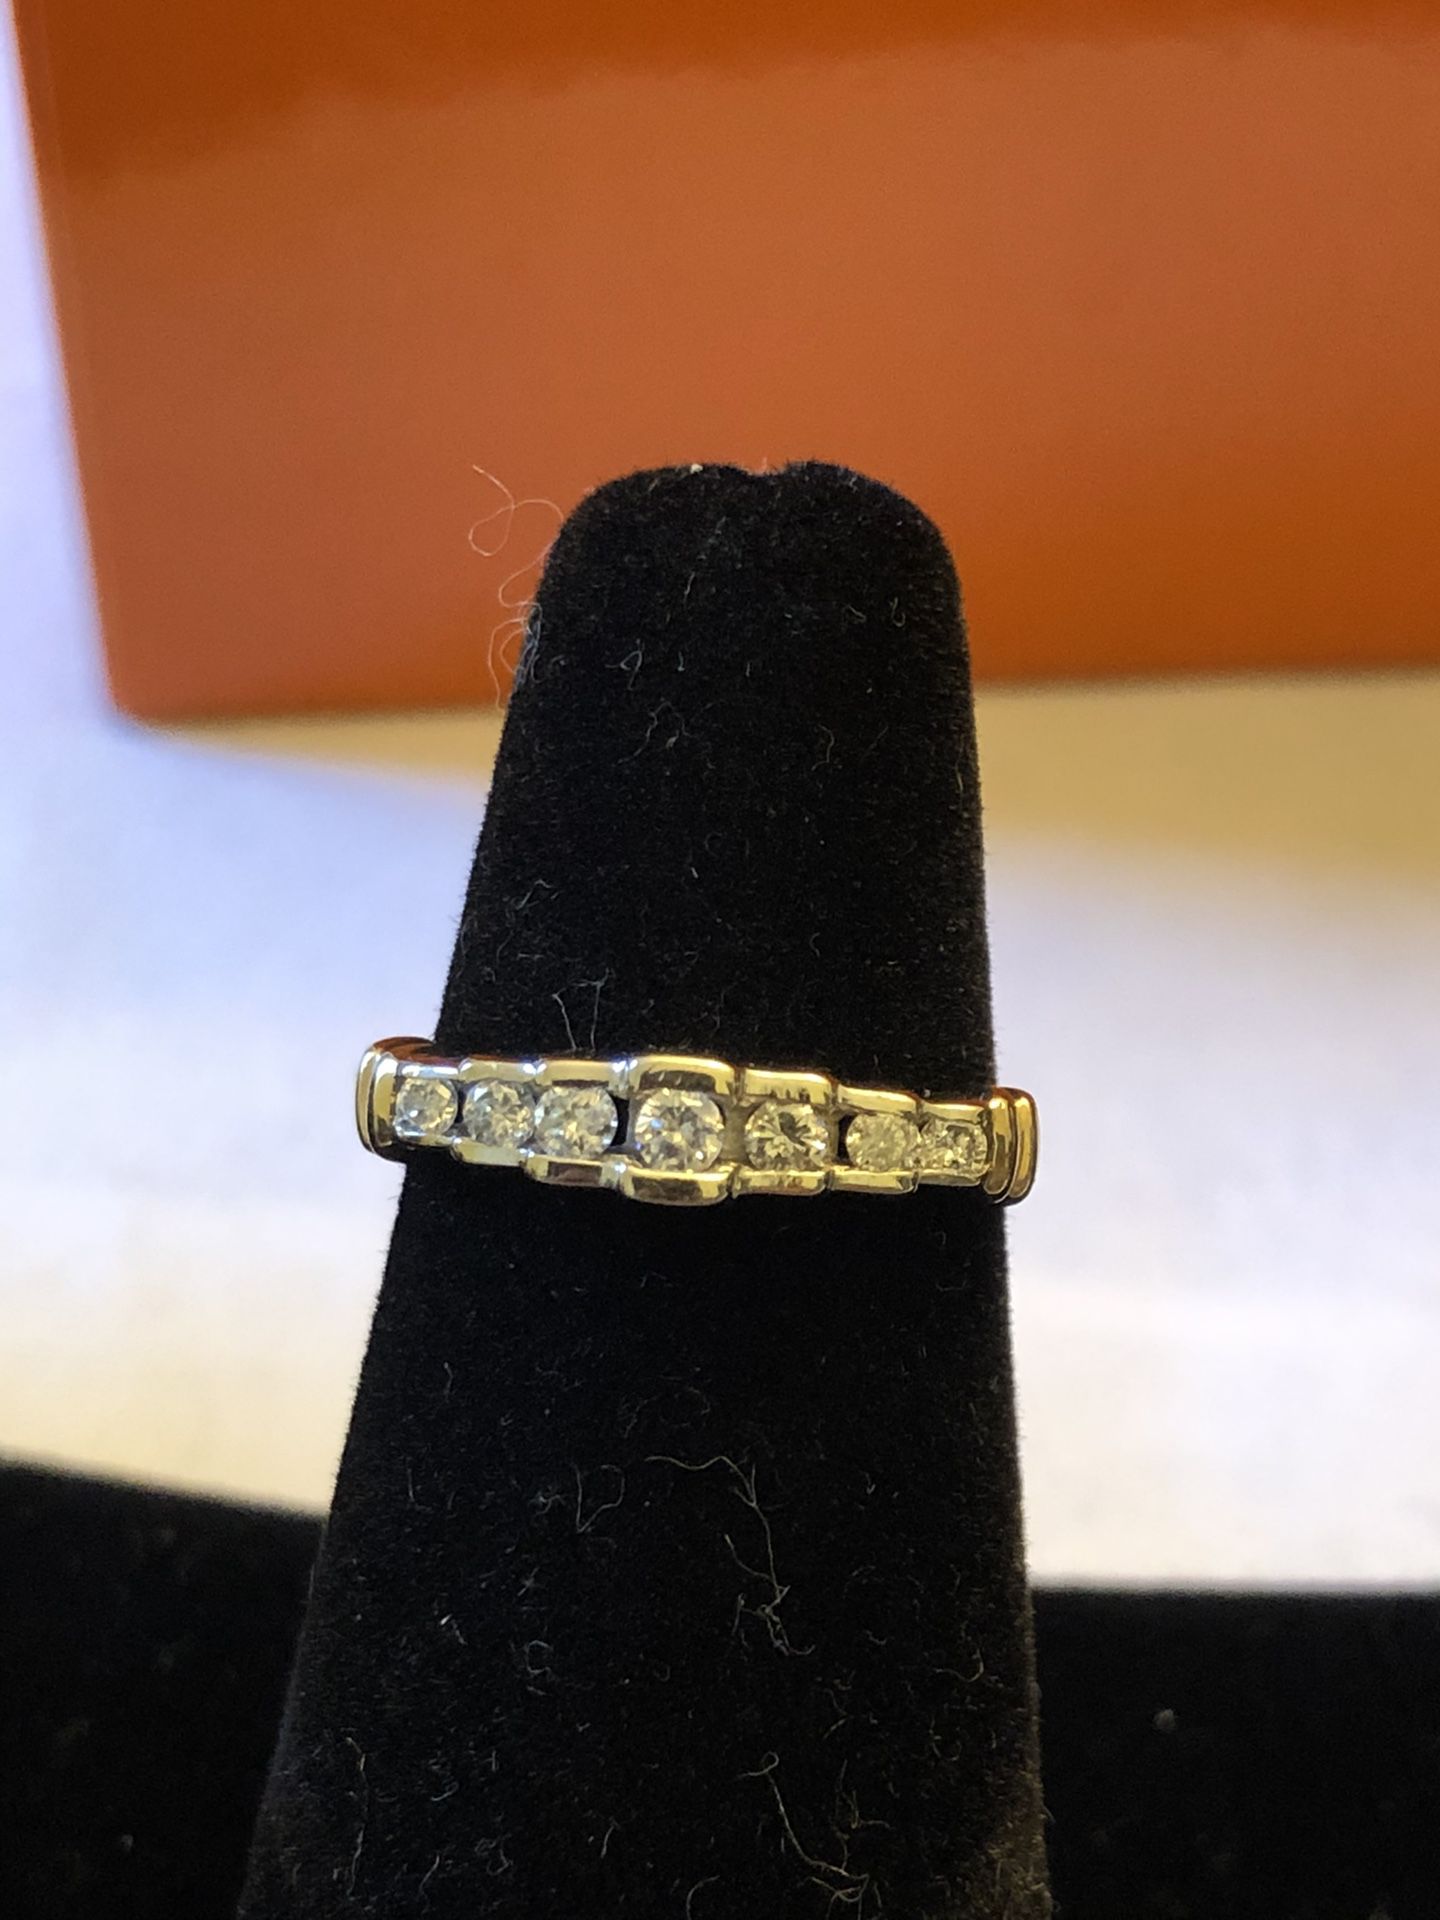 10k real gold& Diamond ring,2 tone gold, 7 good quality &size diamond,1.96 grams,size 4.5.nice design ring,please look at all pictures for more detai